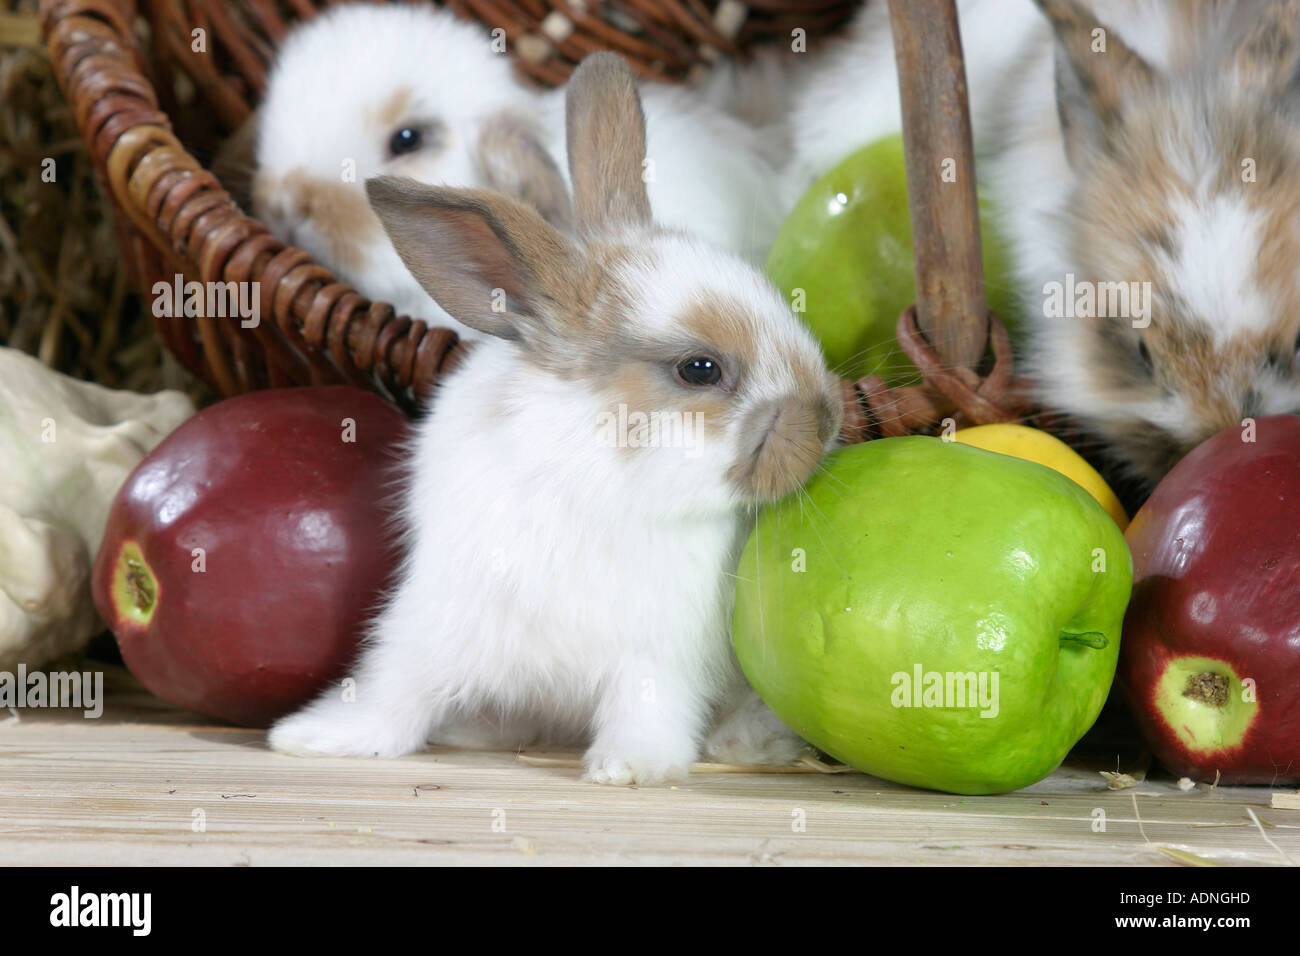 Rabbit Care - Weighing Rabbit on scales Stock Photo - Alamy